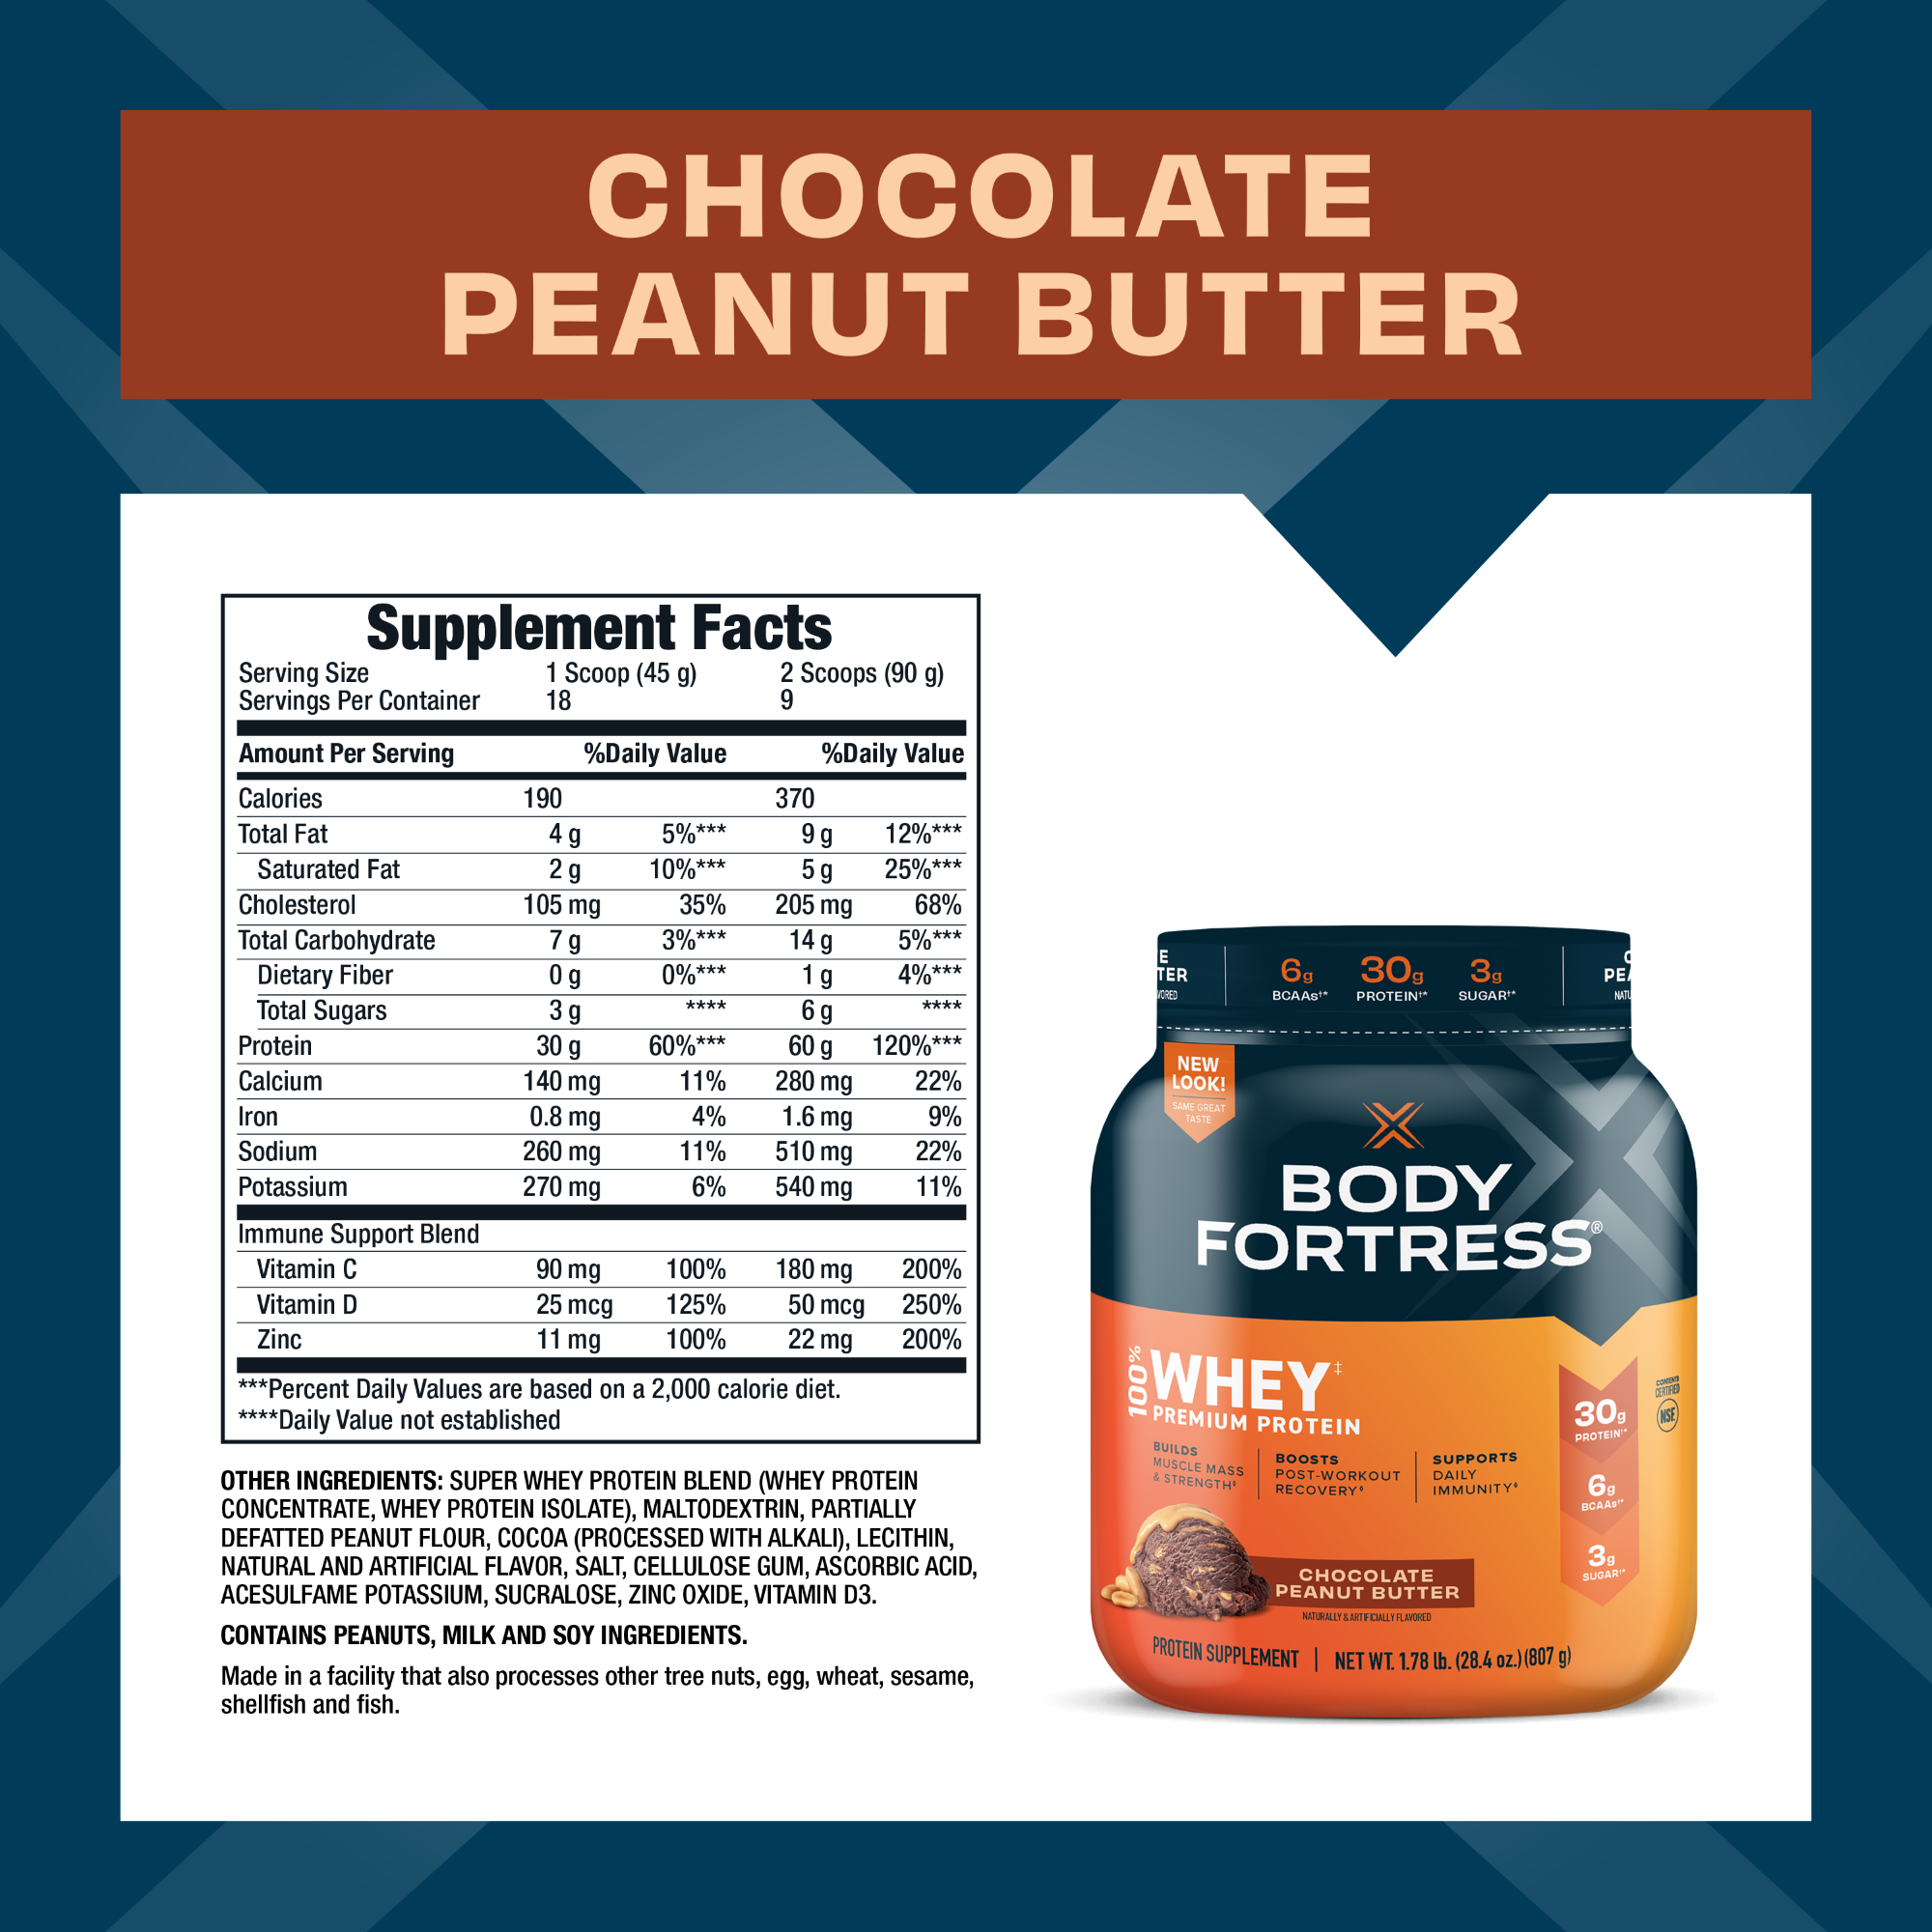 Body Fortress 100% Whey, Premium Protein Powder, Chocolate Peanut Butter, 1.78lbs (Packaging May Vary) - image 3 of 8